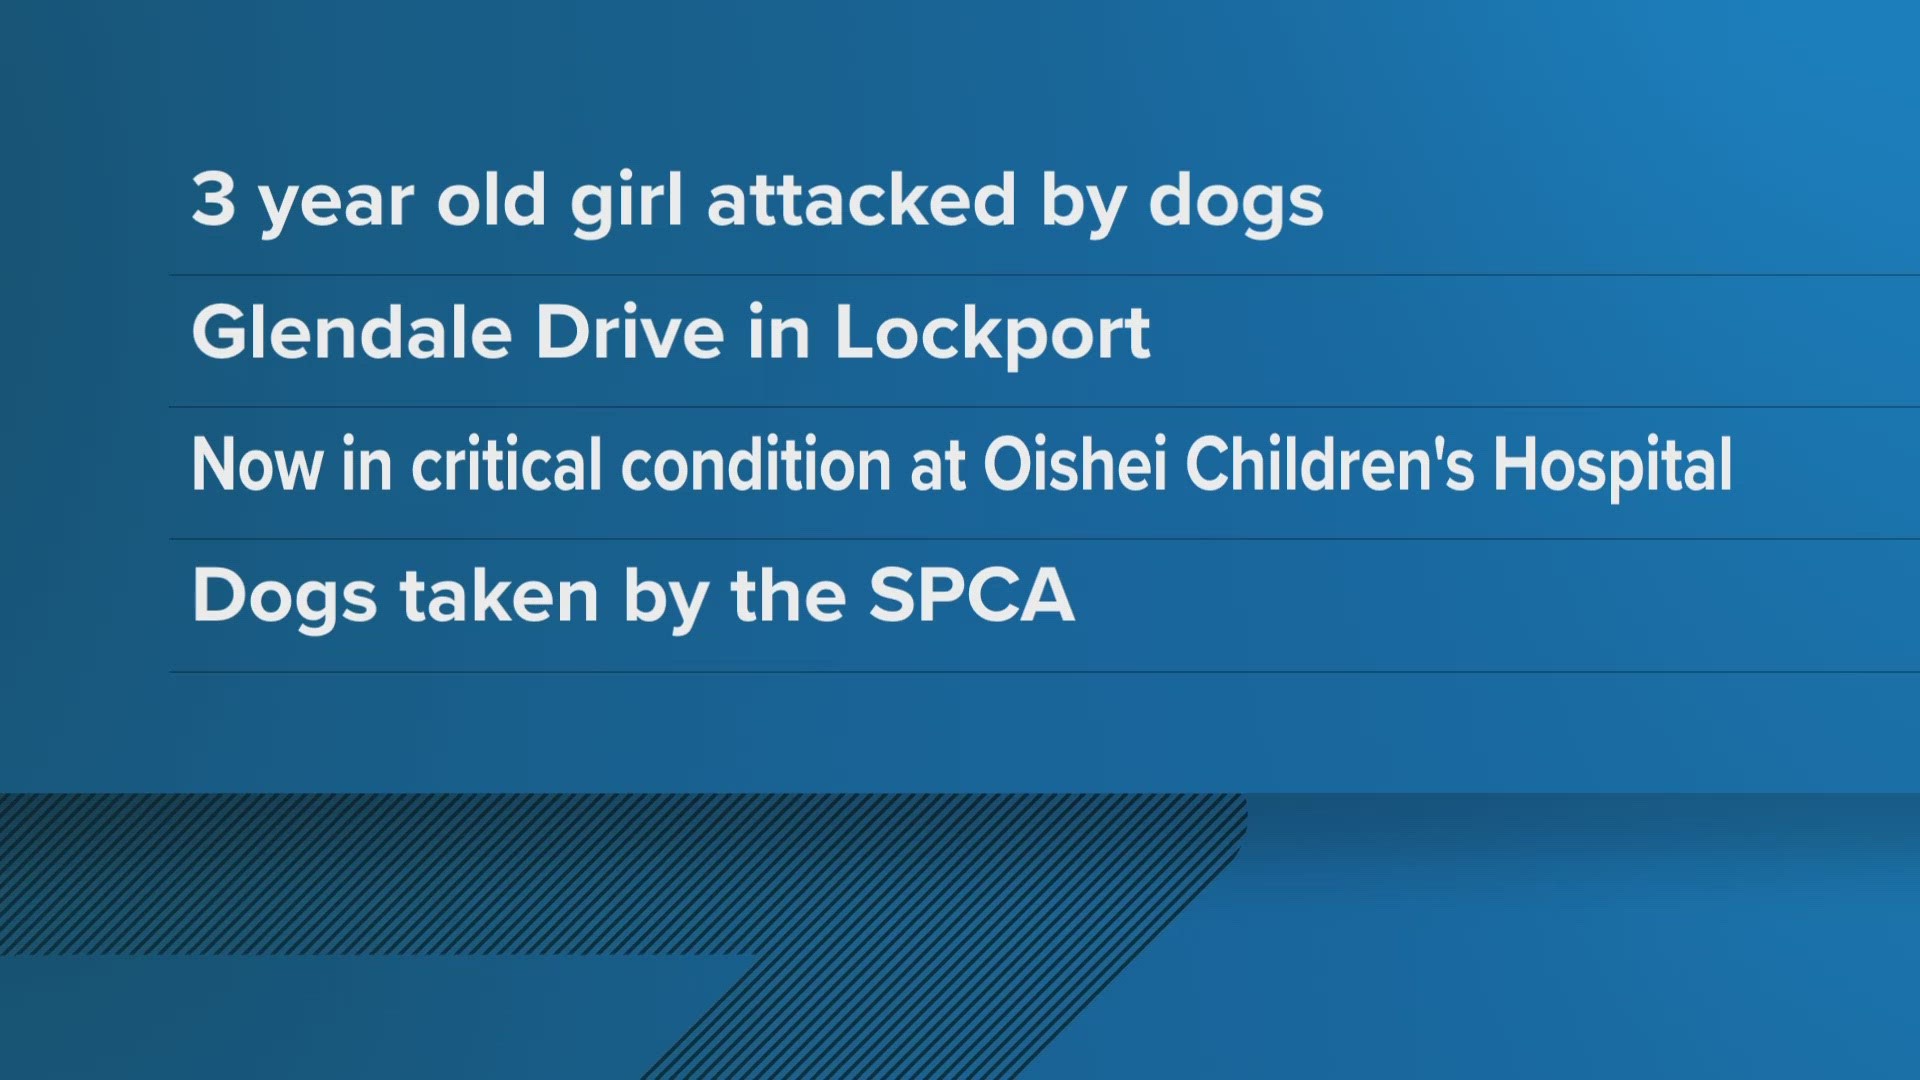 The young girl remains at Oishei Children's hospital. and the S-P-C-A of Niagara County has taken possession of the dogs.